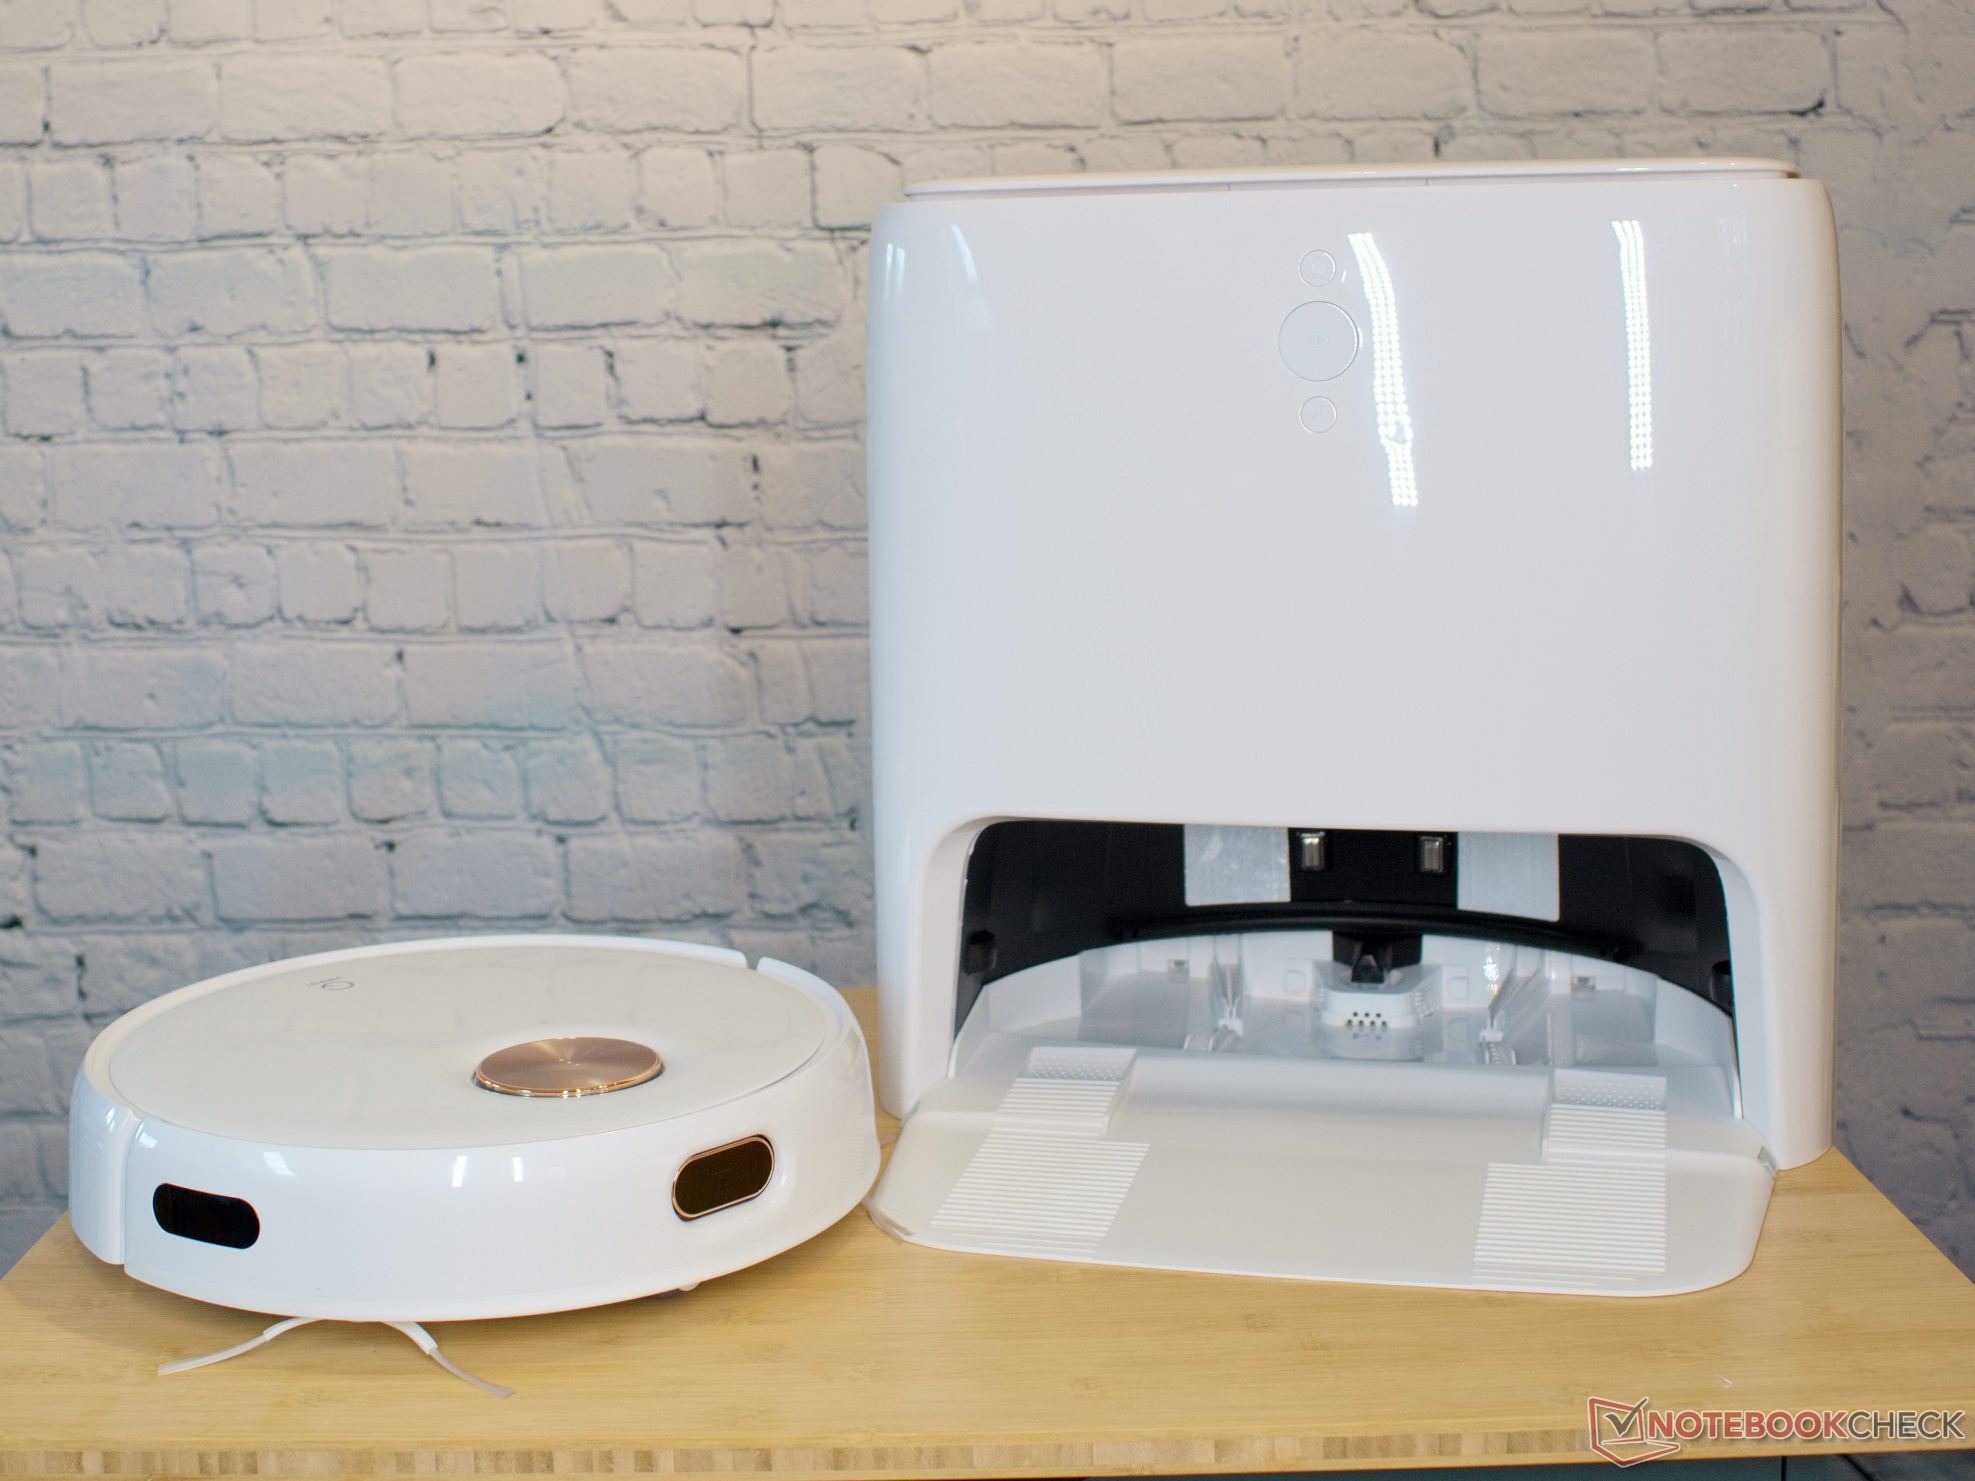 Yeedi Floor 3 Station review: flat and powerful with a self-cleaning station thumbnail